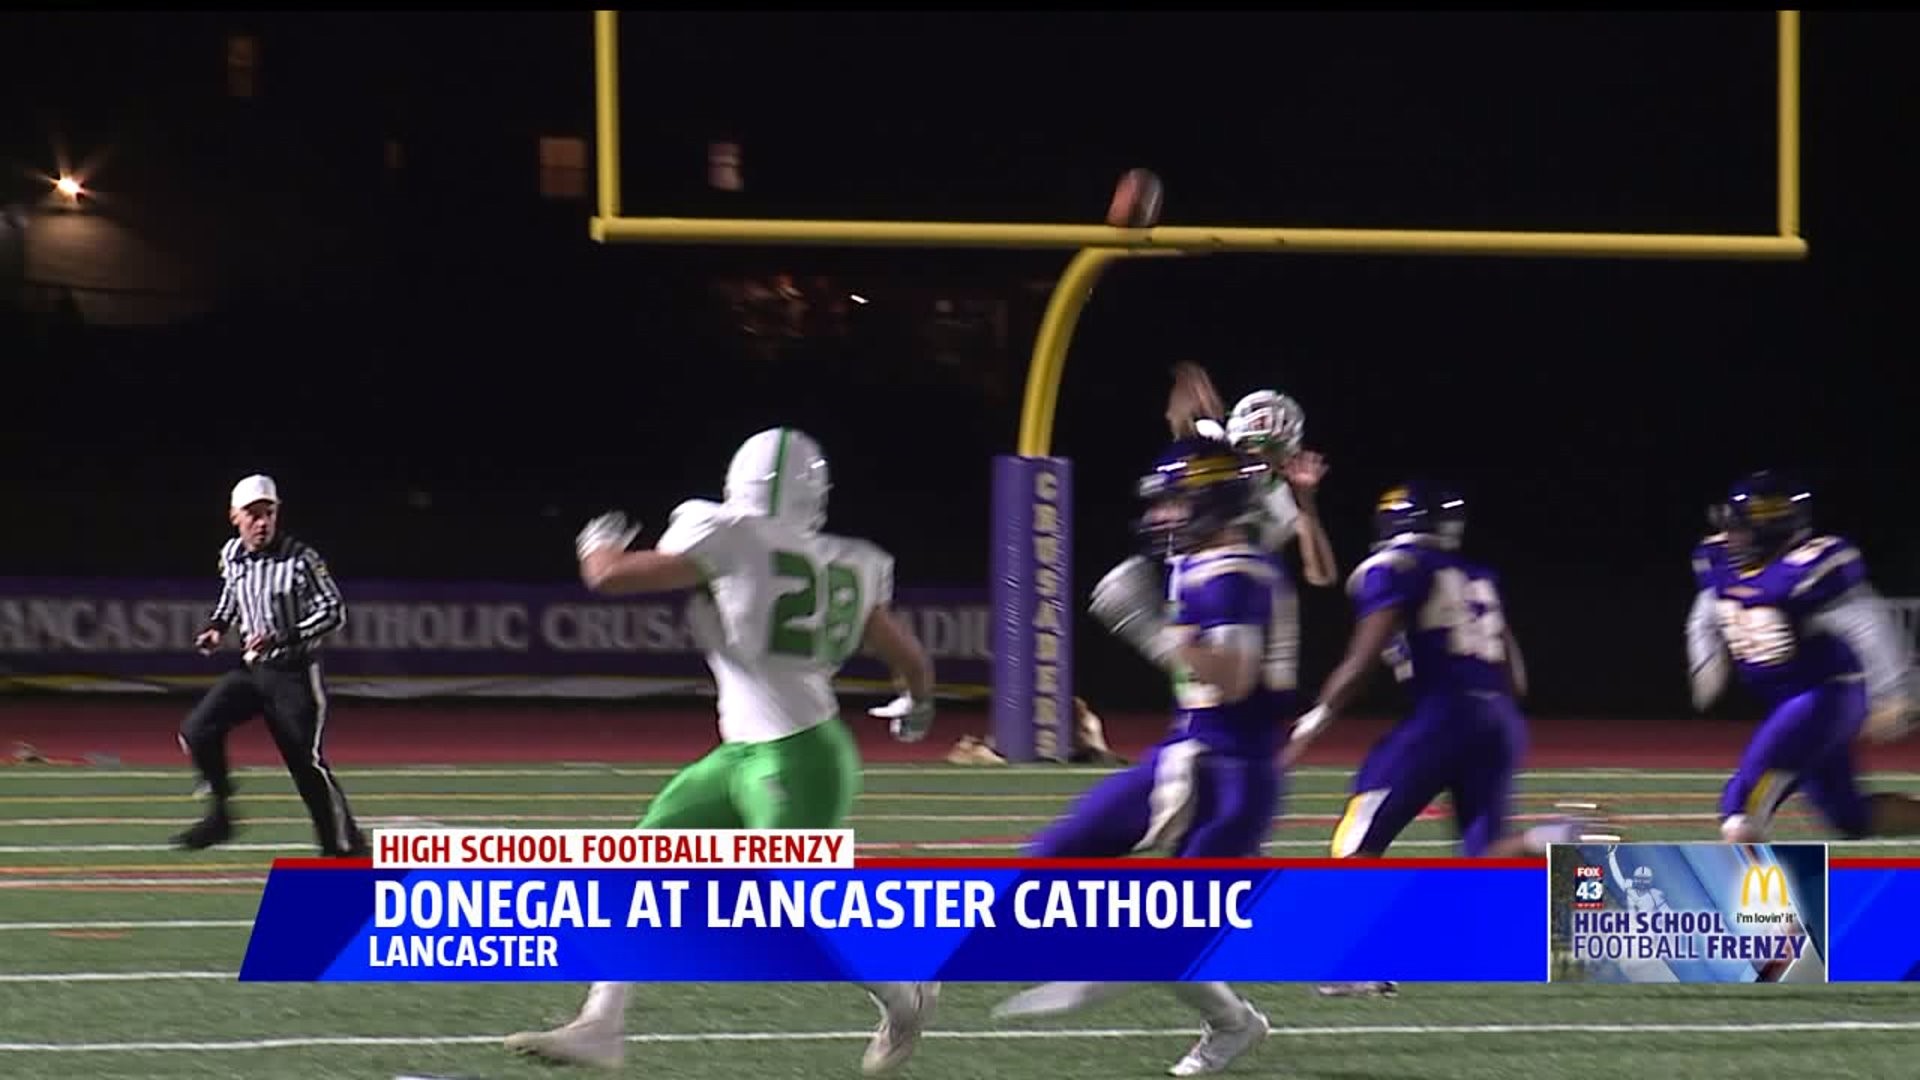 HSFF week 9 Donegal at Lancaster Catholic highlights